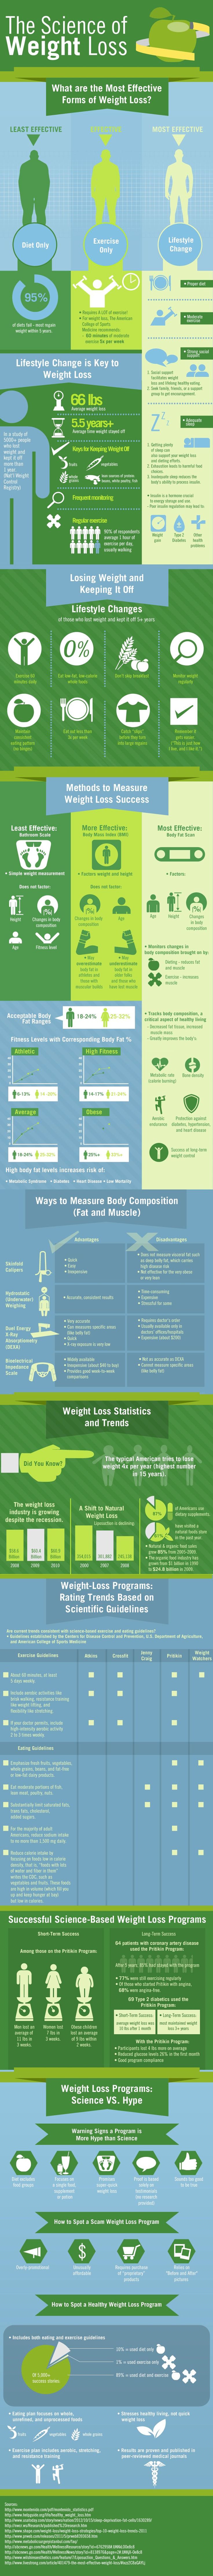 These 10 Graphs to Help You Lose Weight are THE BEST! I already STARTED LOSING W...